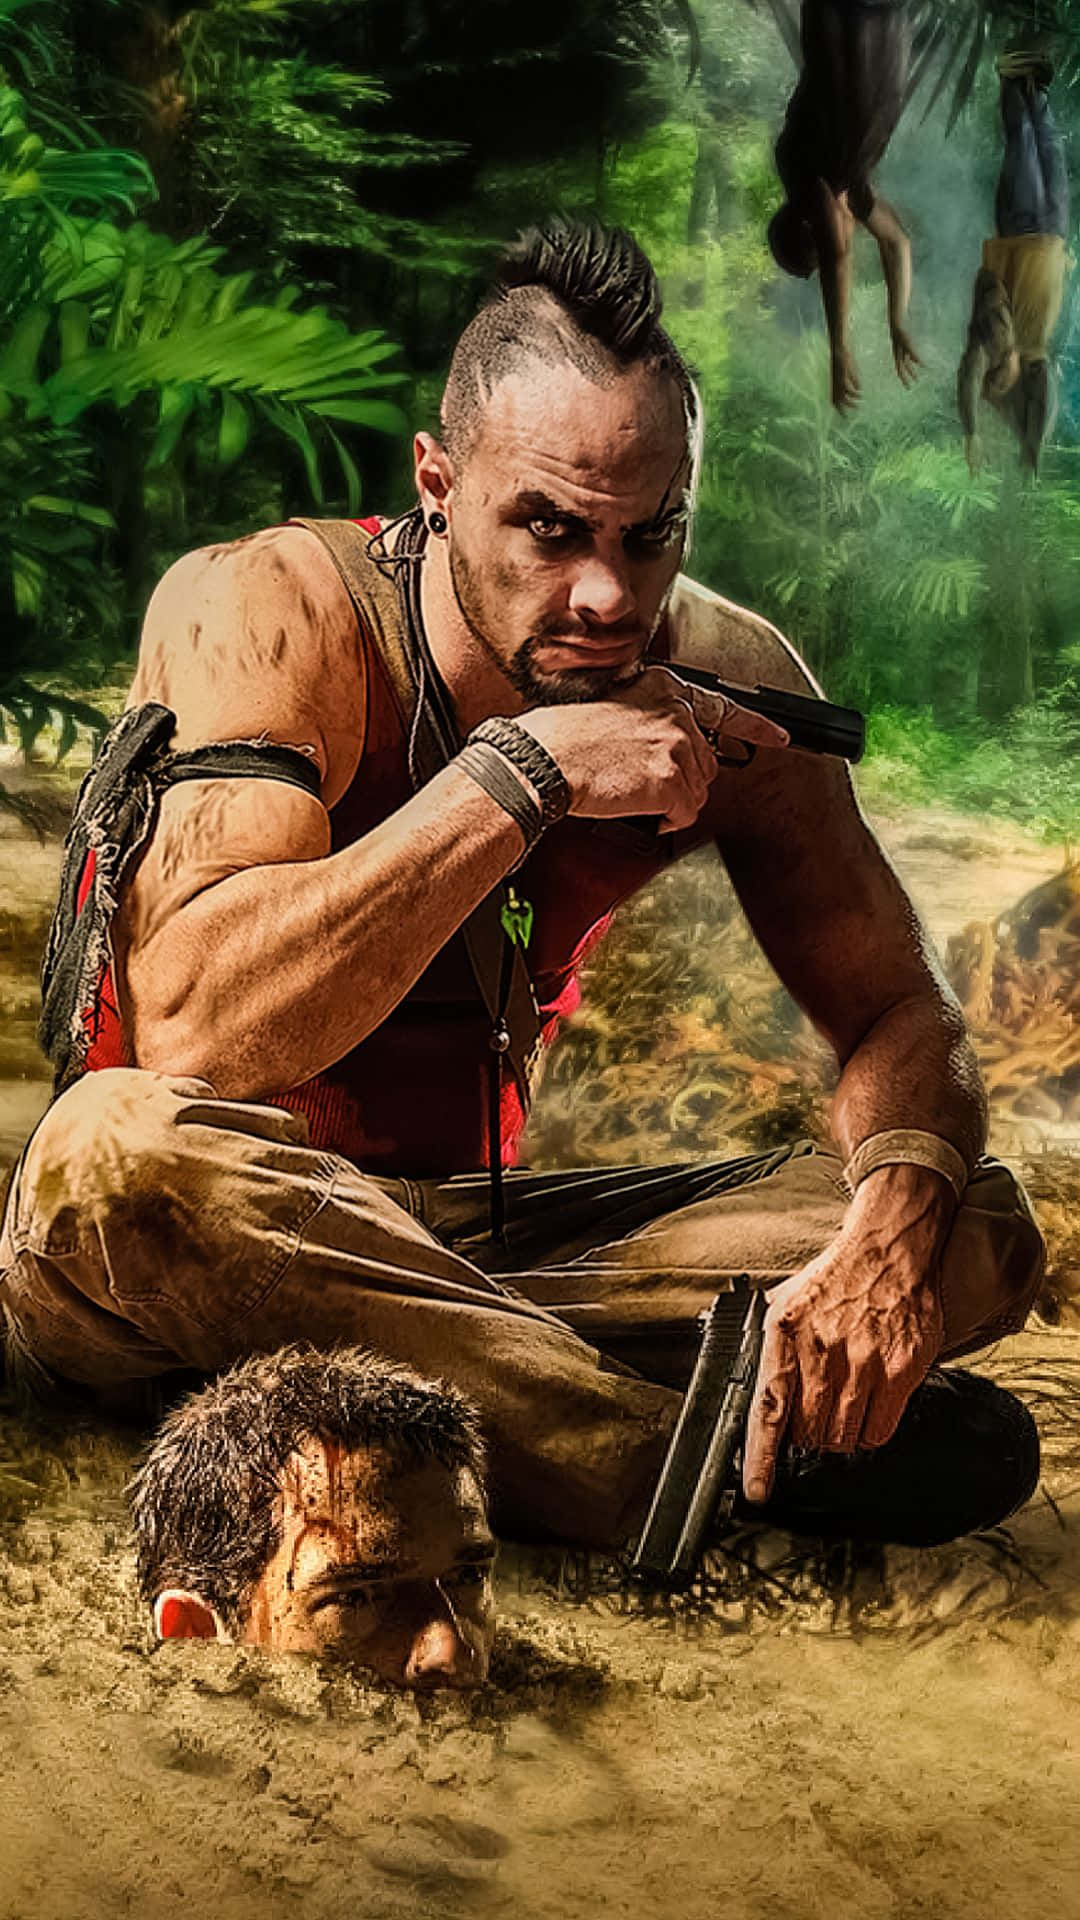 Sharp and Eerie Far Cry 3 Image on iPhone XS